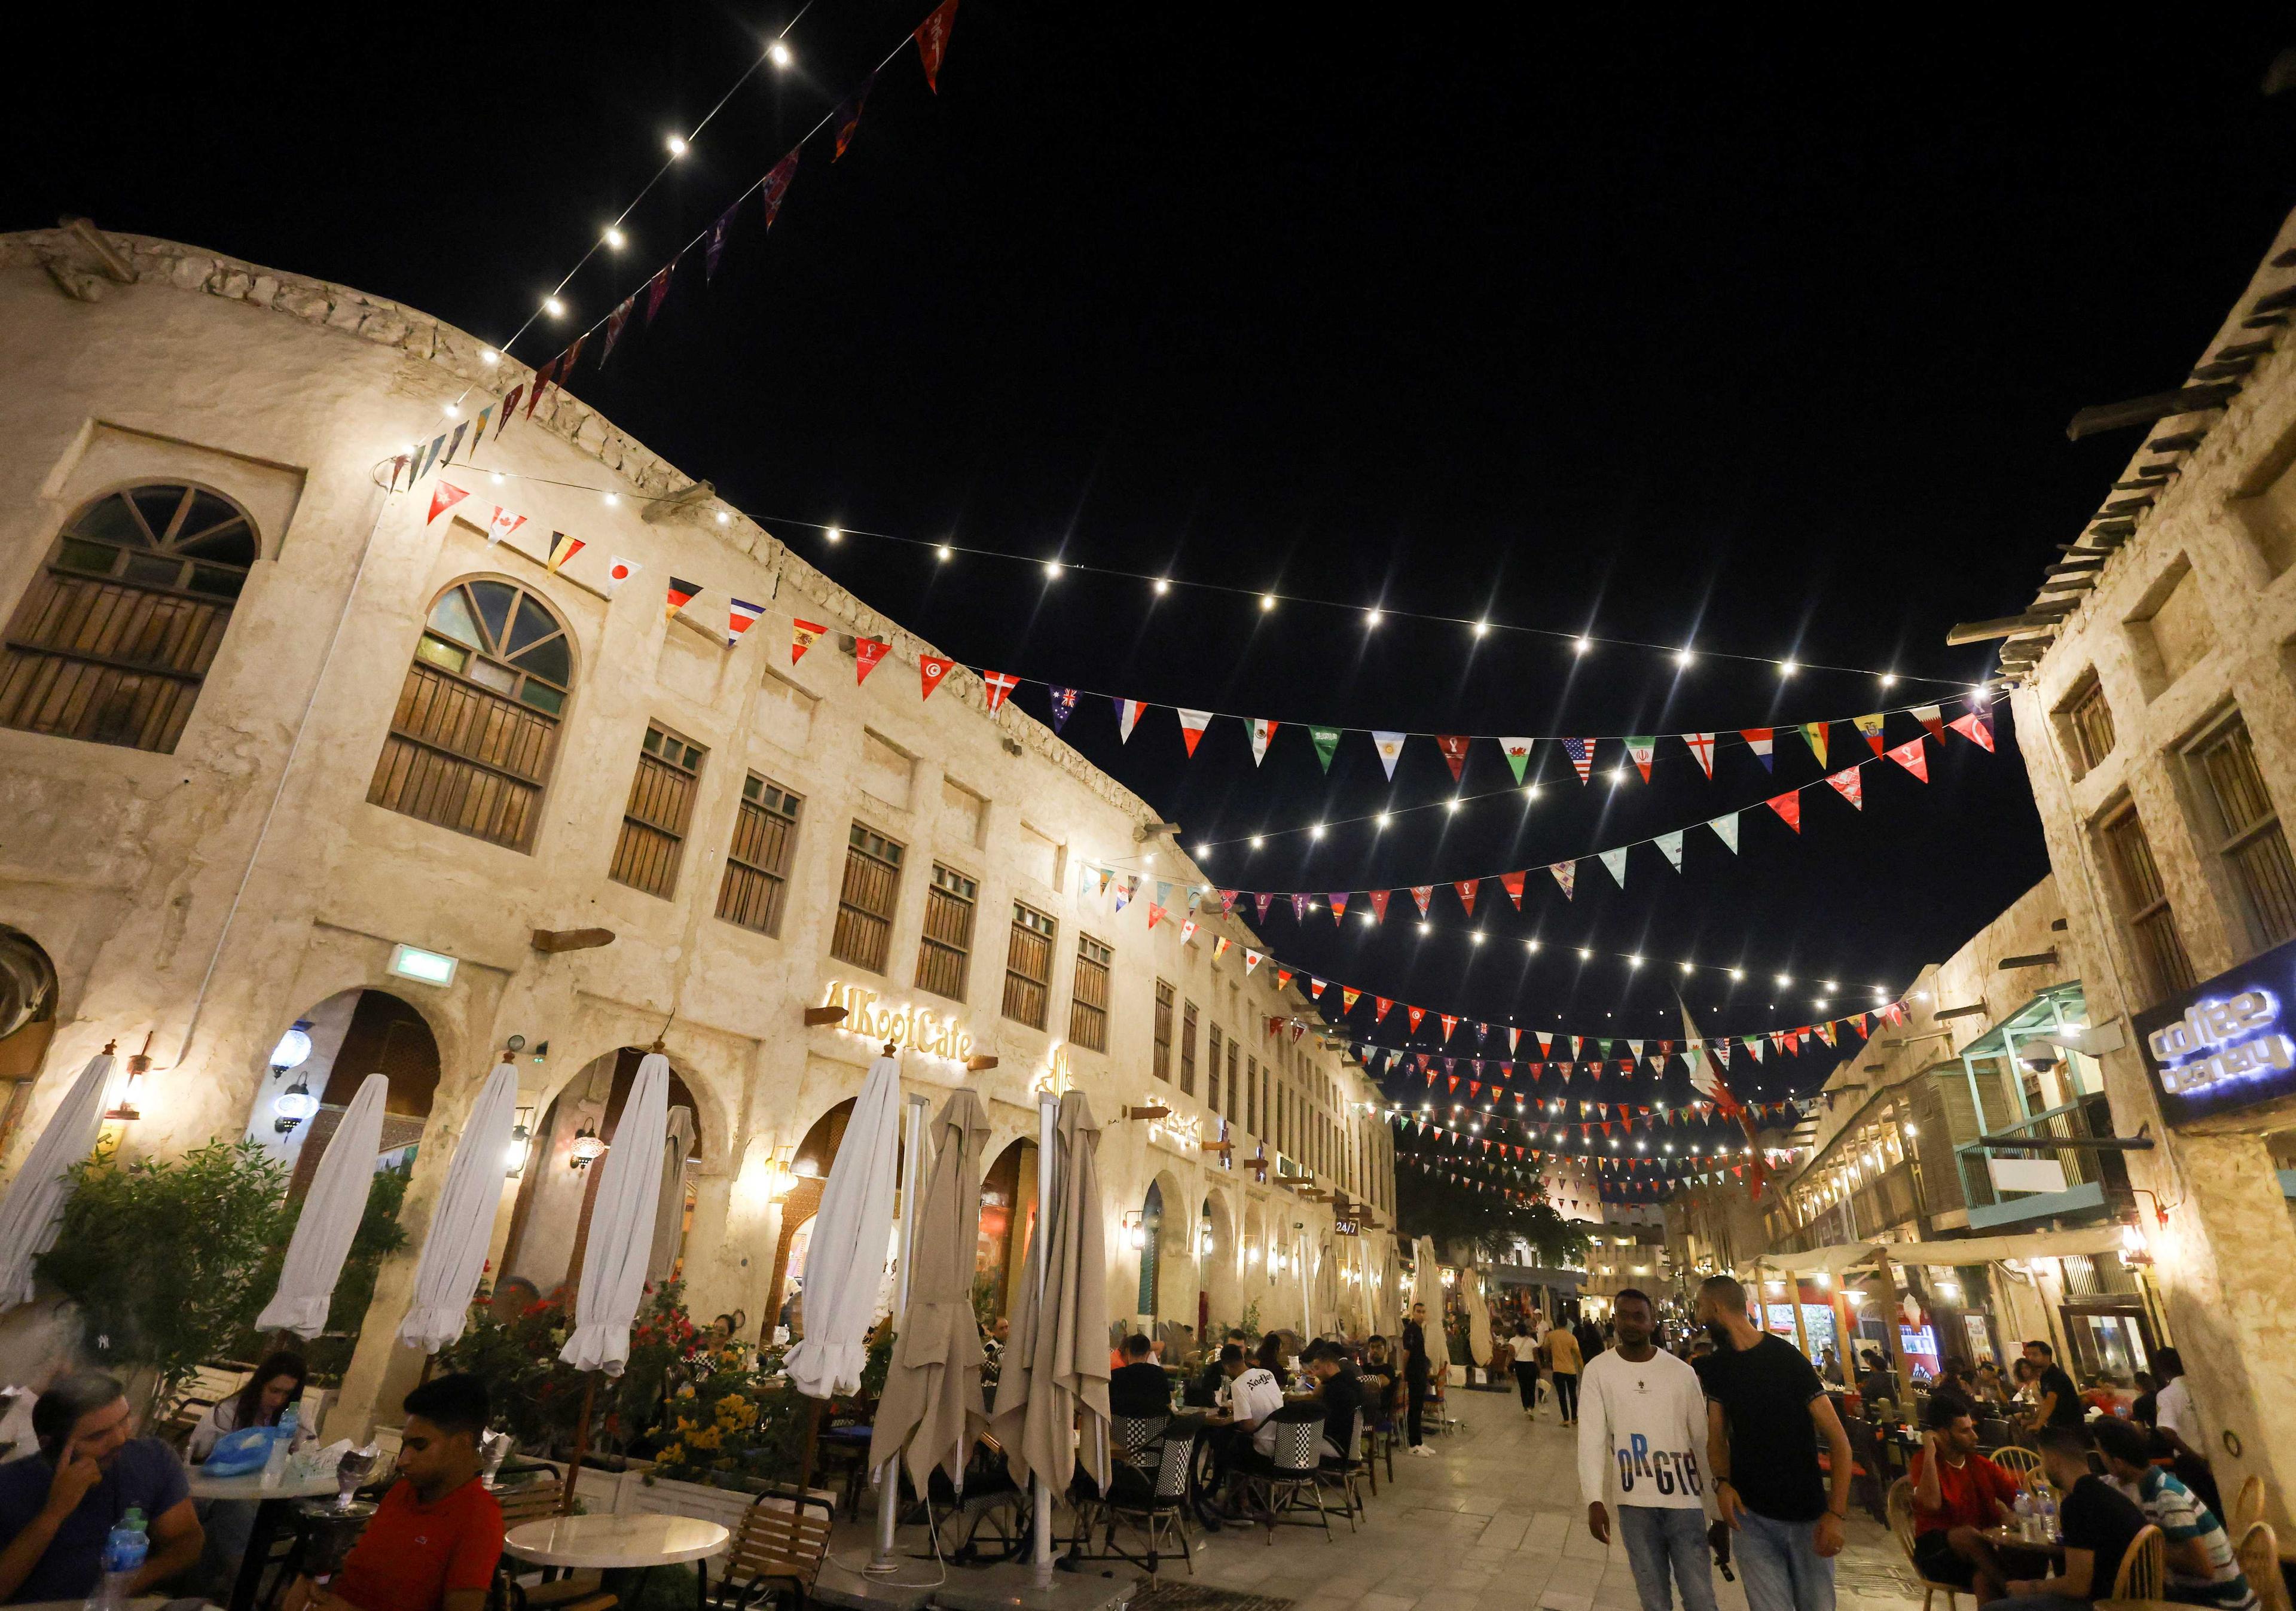 People walk at Souq Waqif, which has been decorated with international flags, ahead of the Fifa World Cup 2022 soccer tournament in Doha, Qatar Nov 7. Photo: Reuters